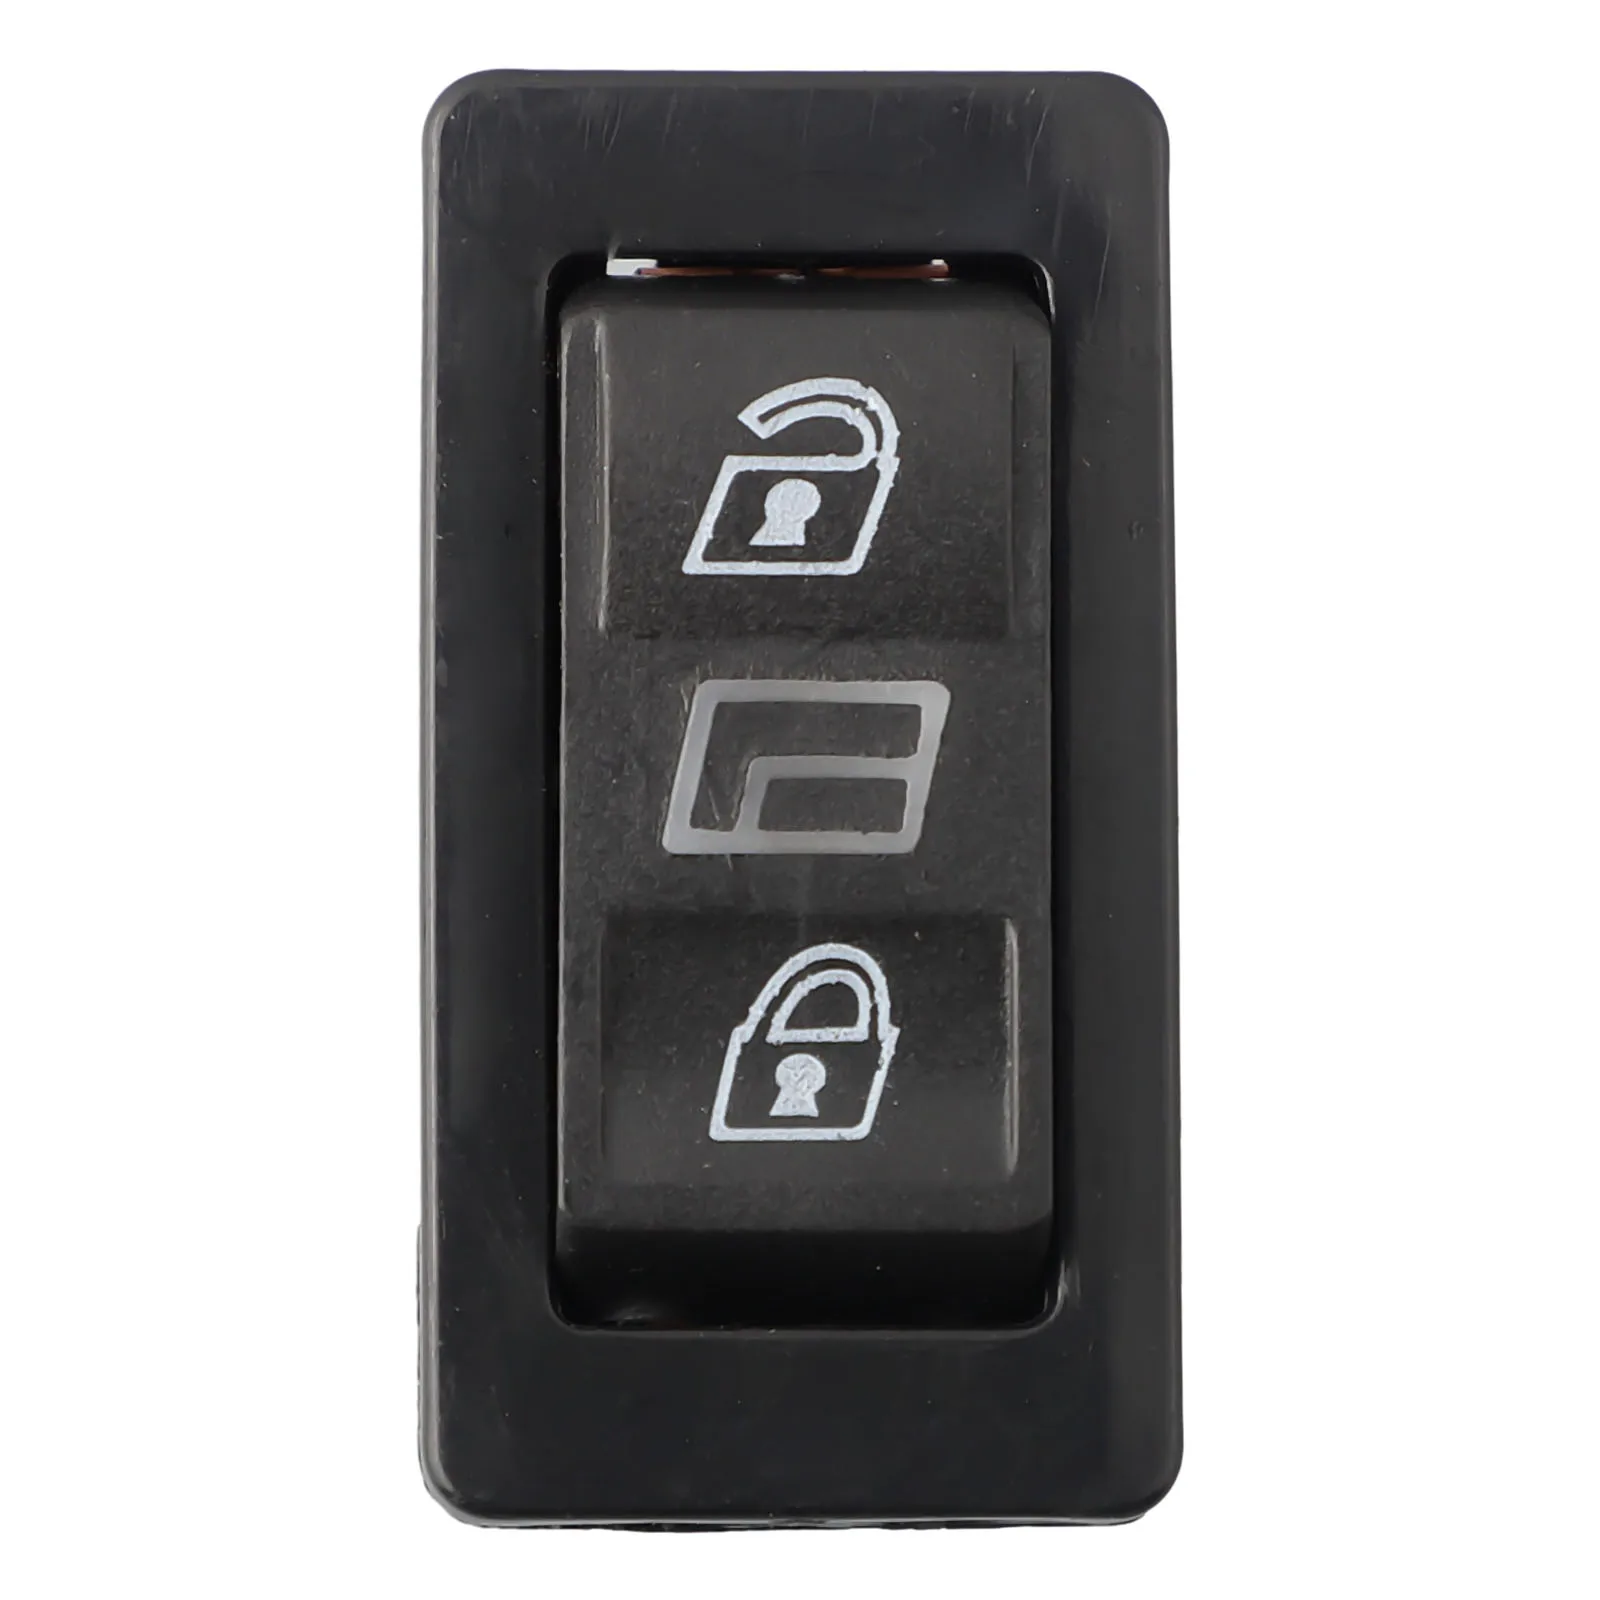 

Universal Car 5pins DPDT Power Door Glass Switch Control Right or Left Car Door Glass Durable and Convenient